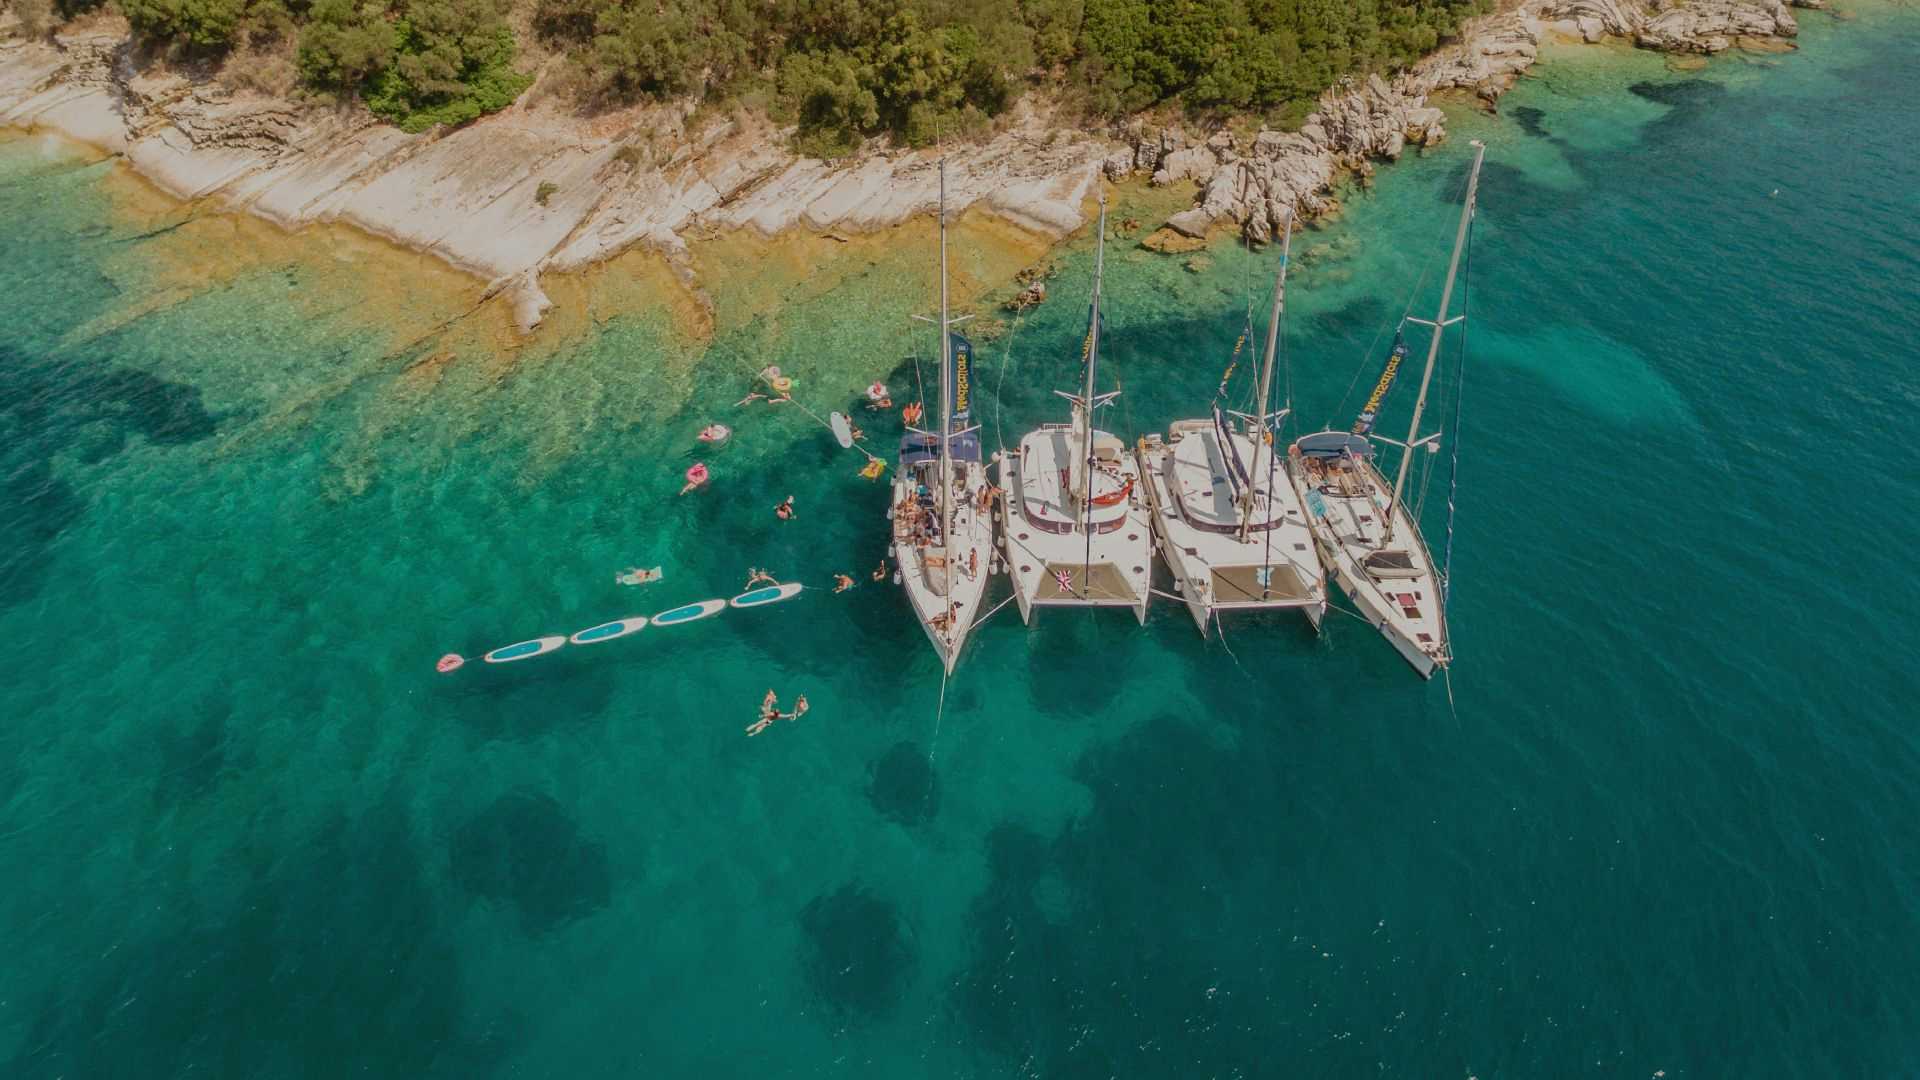 MedSailors yachts rafted together in a bay